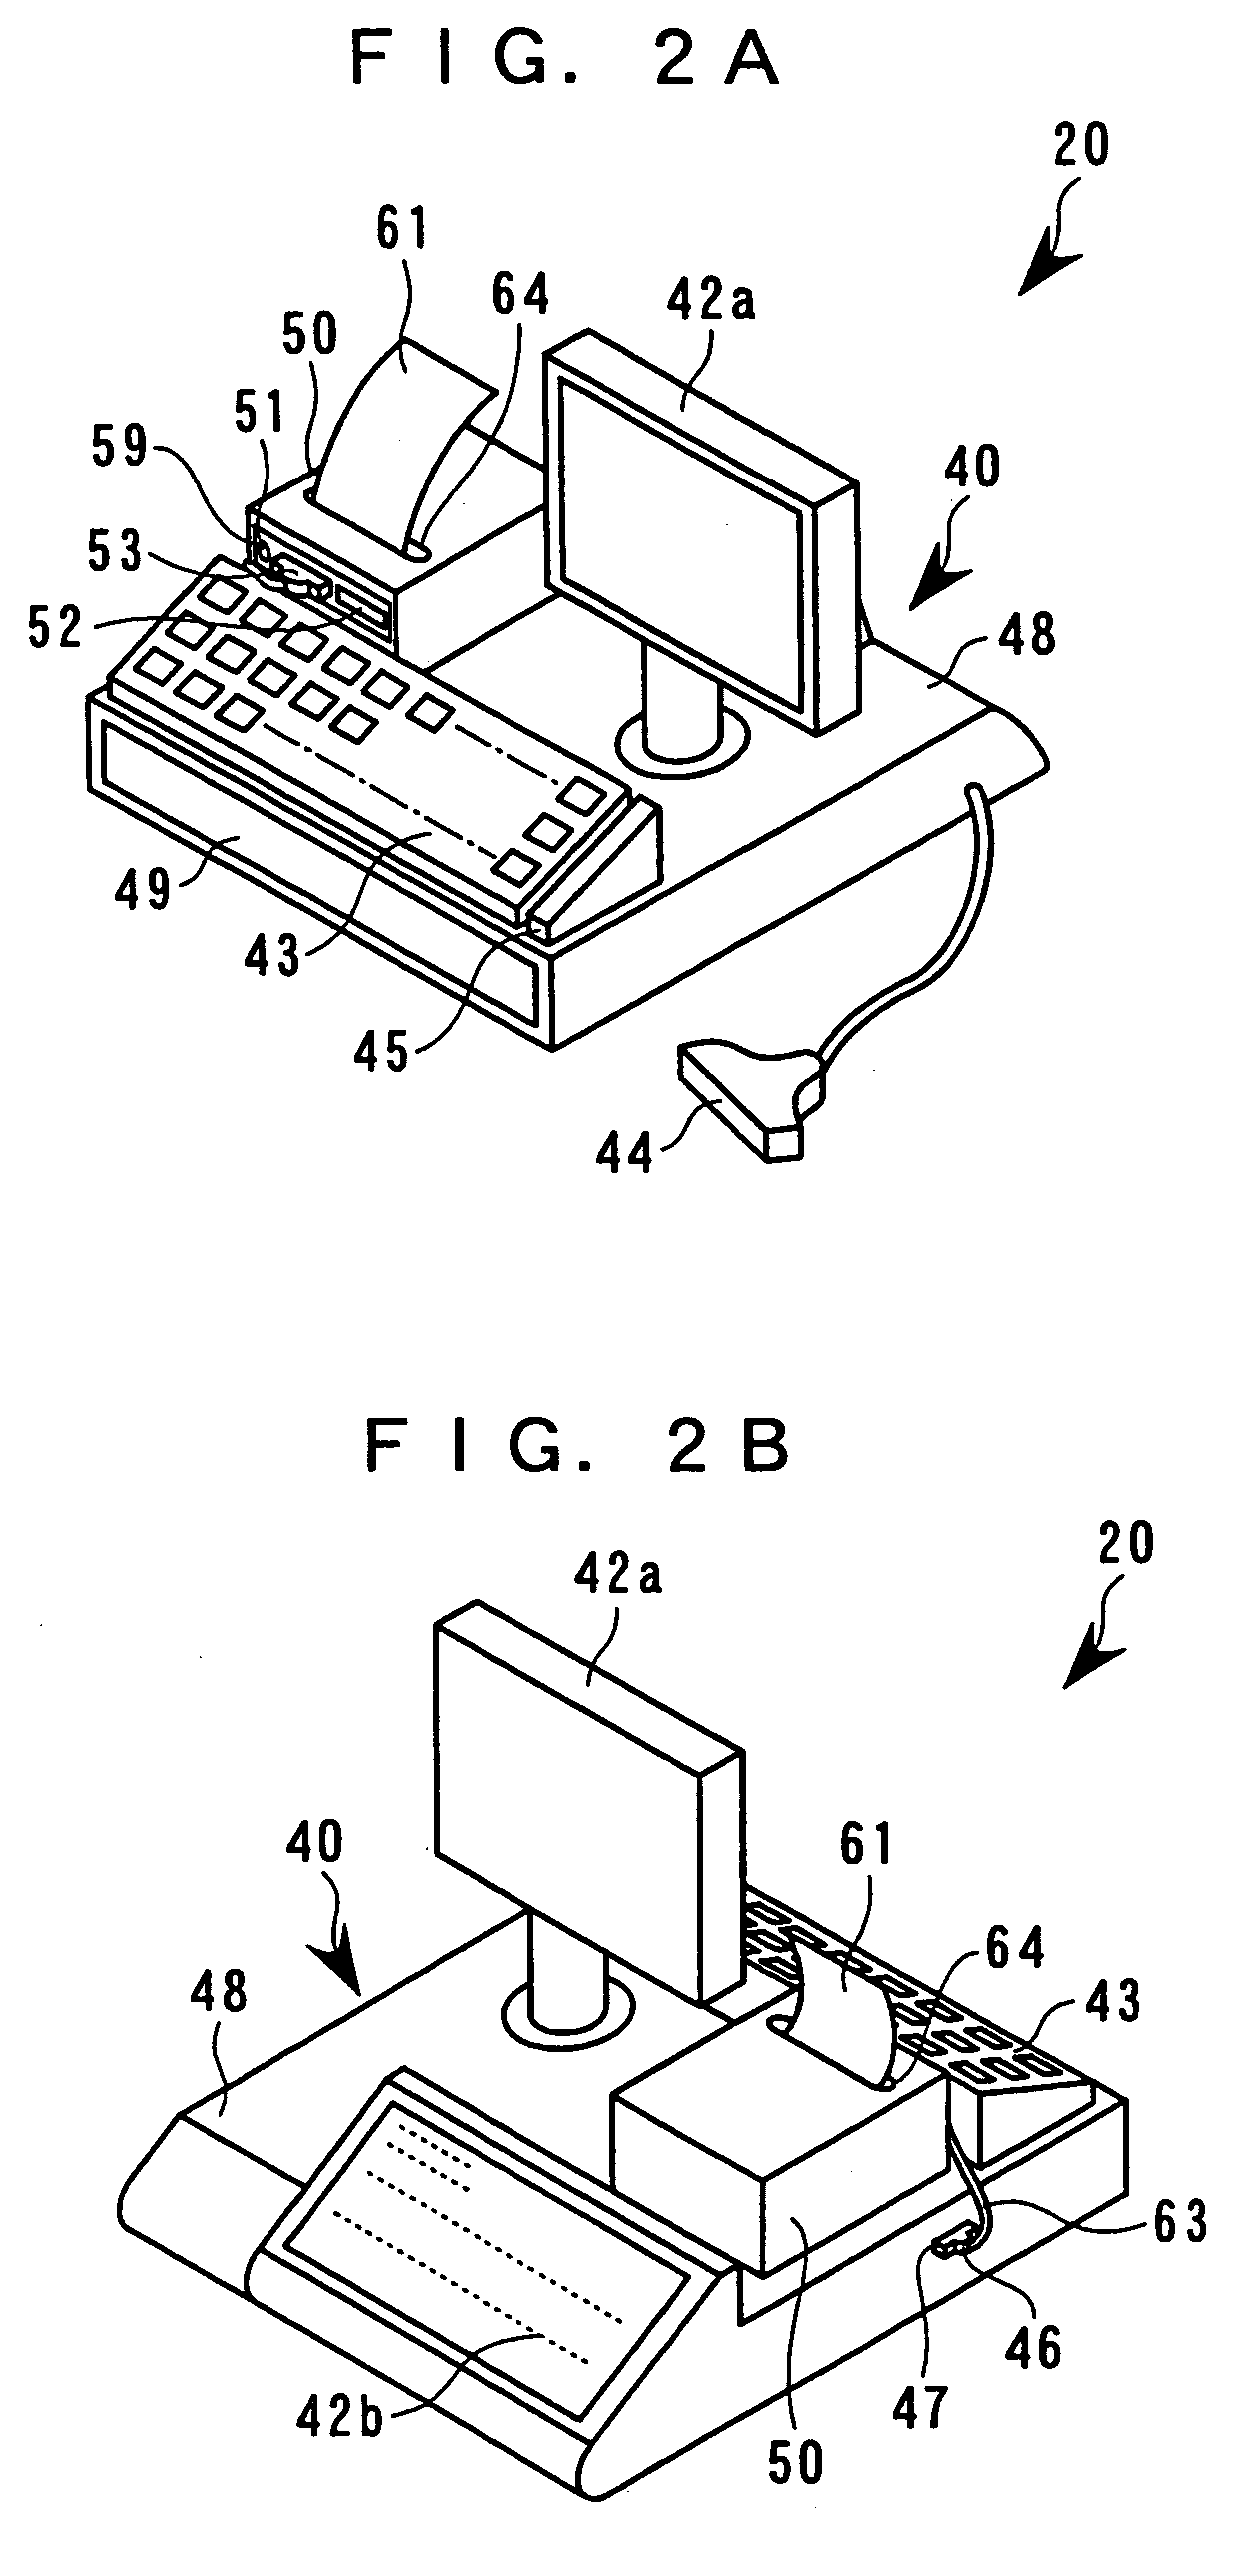 POS system, network system, method of generating printing data for POS system, and method of managing sales and advertisement information in network system